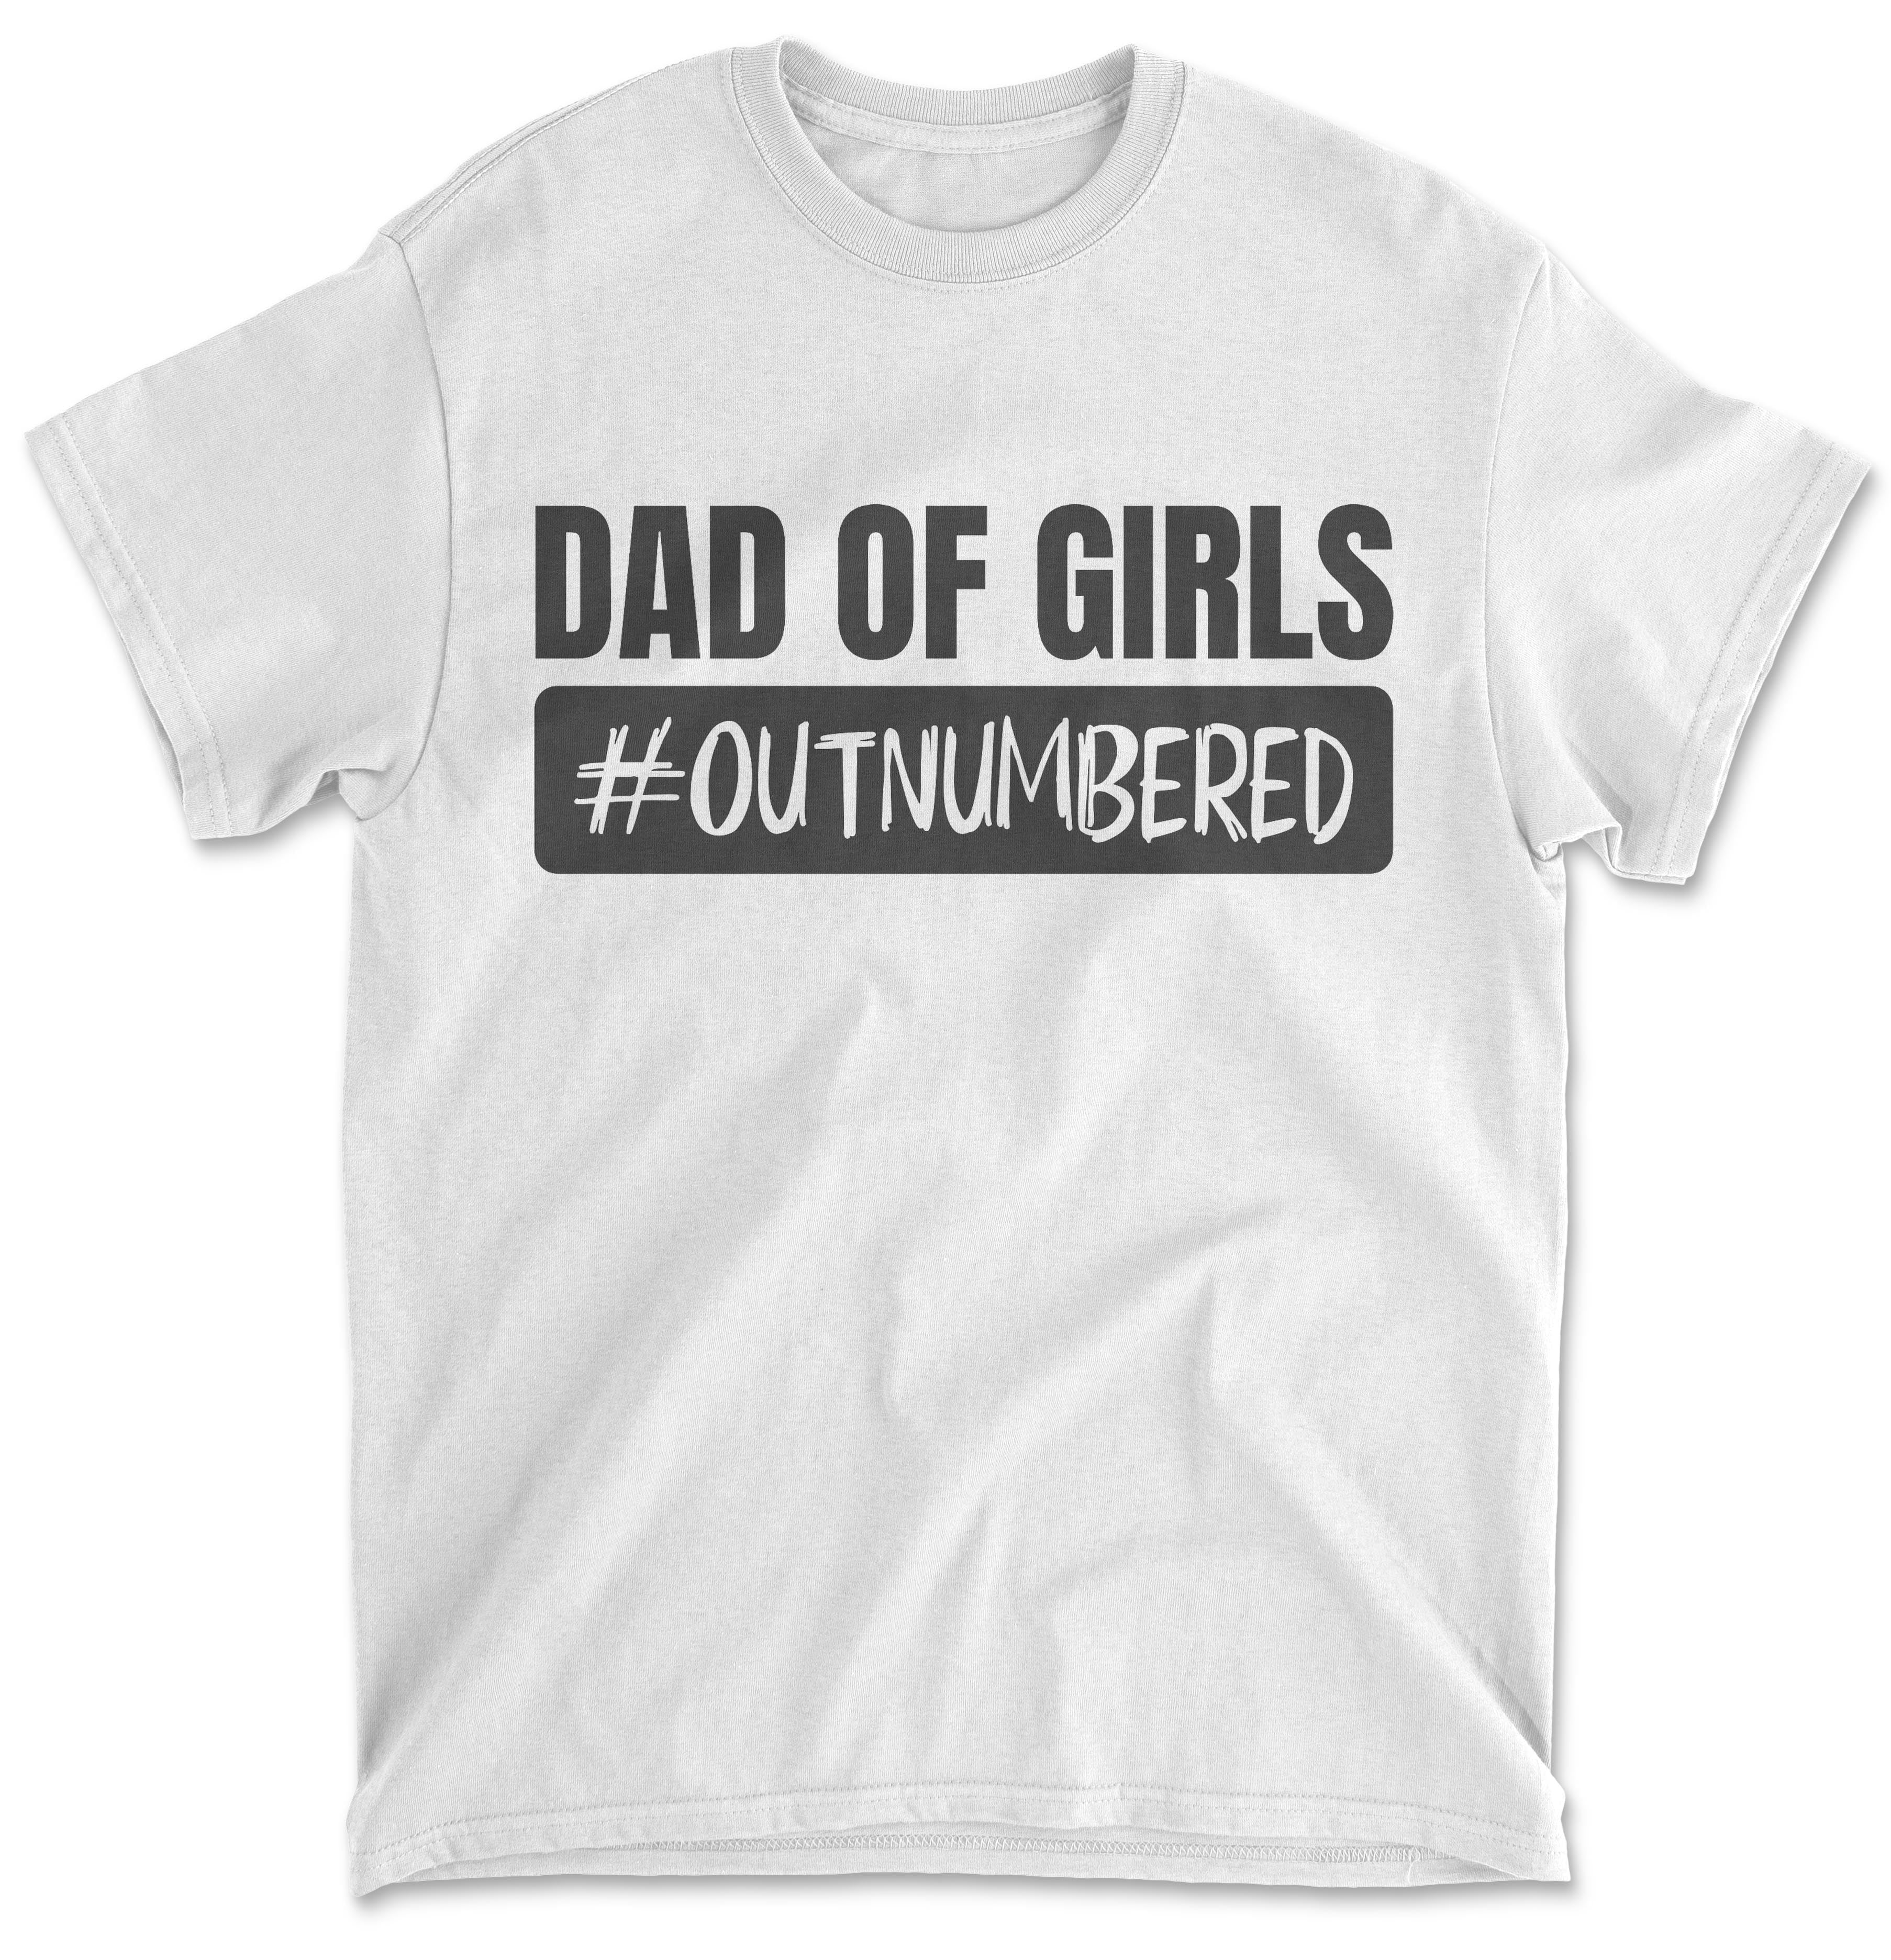 Outnumbered Girl Dad T-Shirt, Girl Dad Shirt for Men, Father's Day